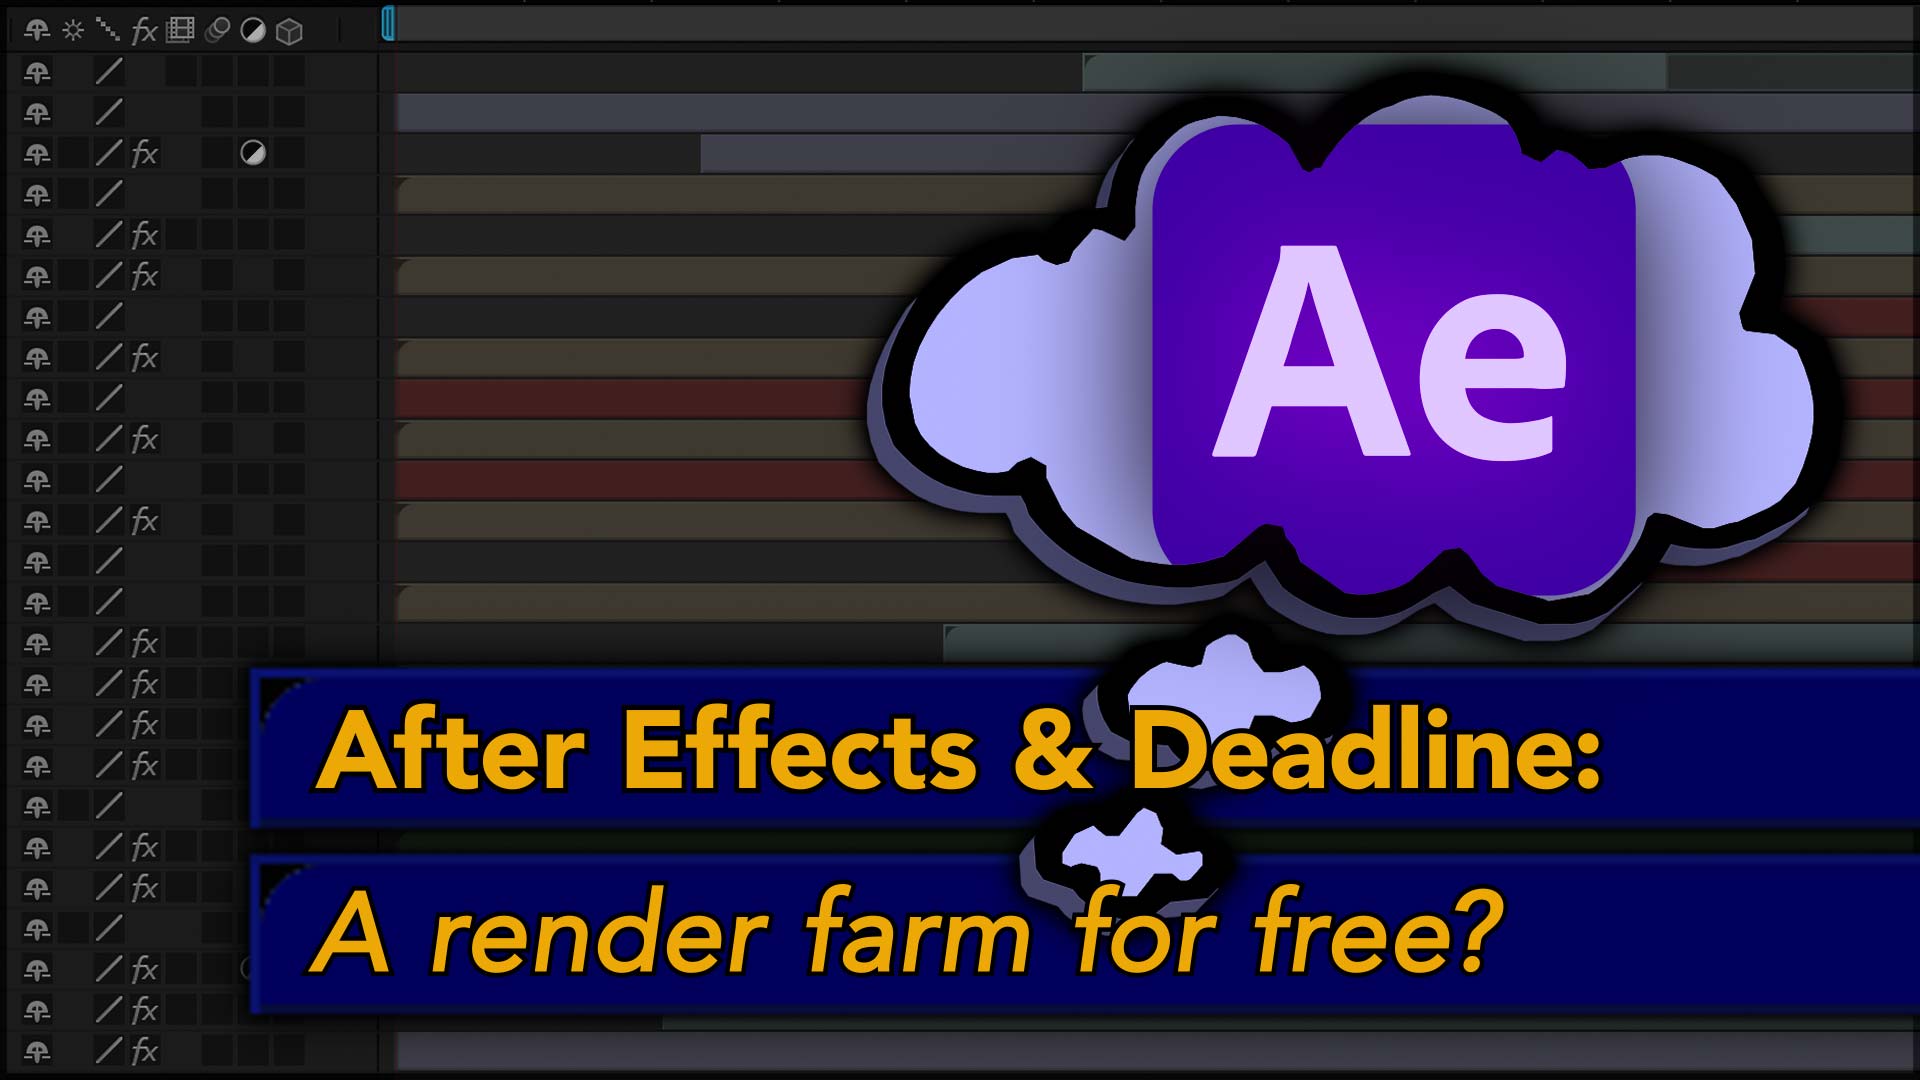 After Effects: Using Deadline for a Render Farm 34